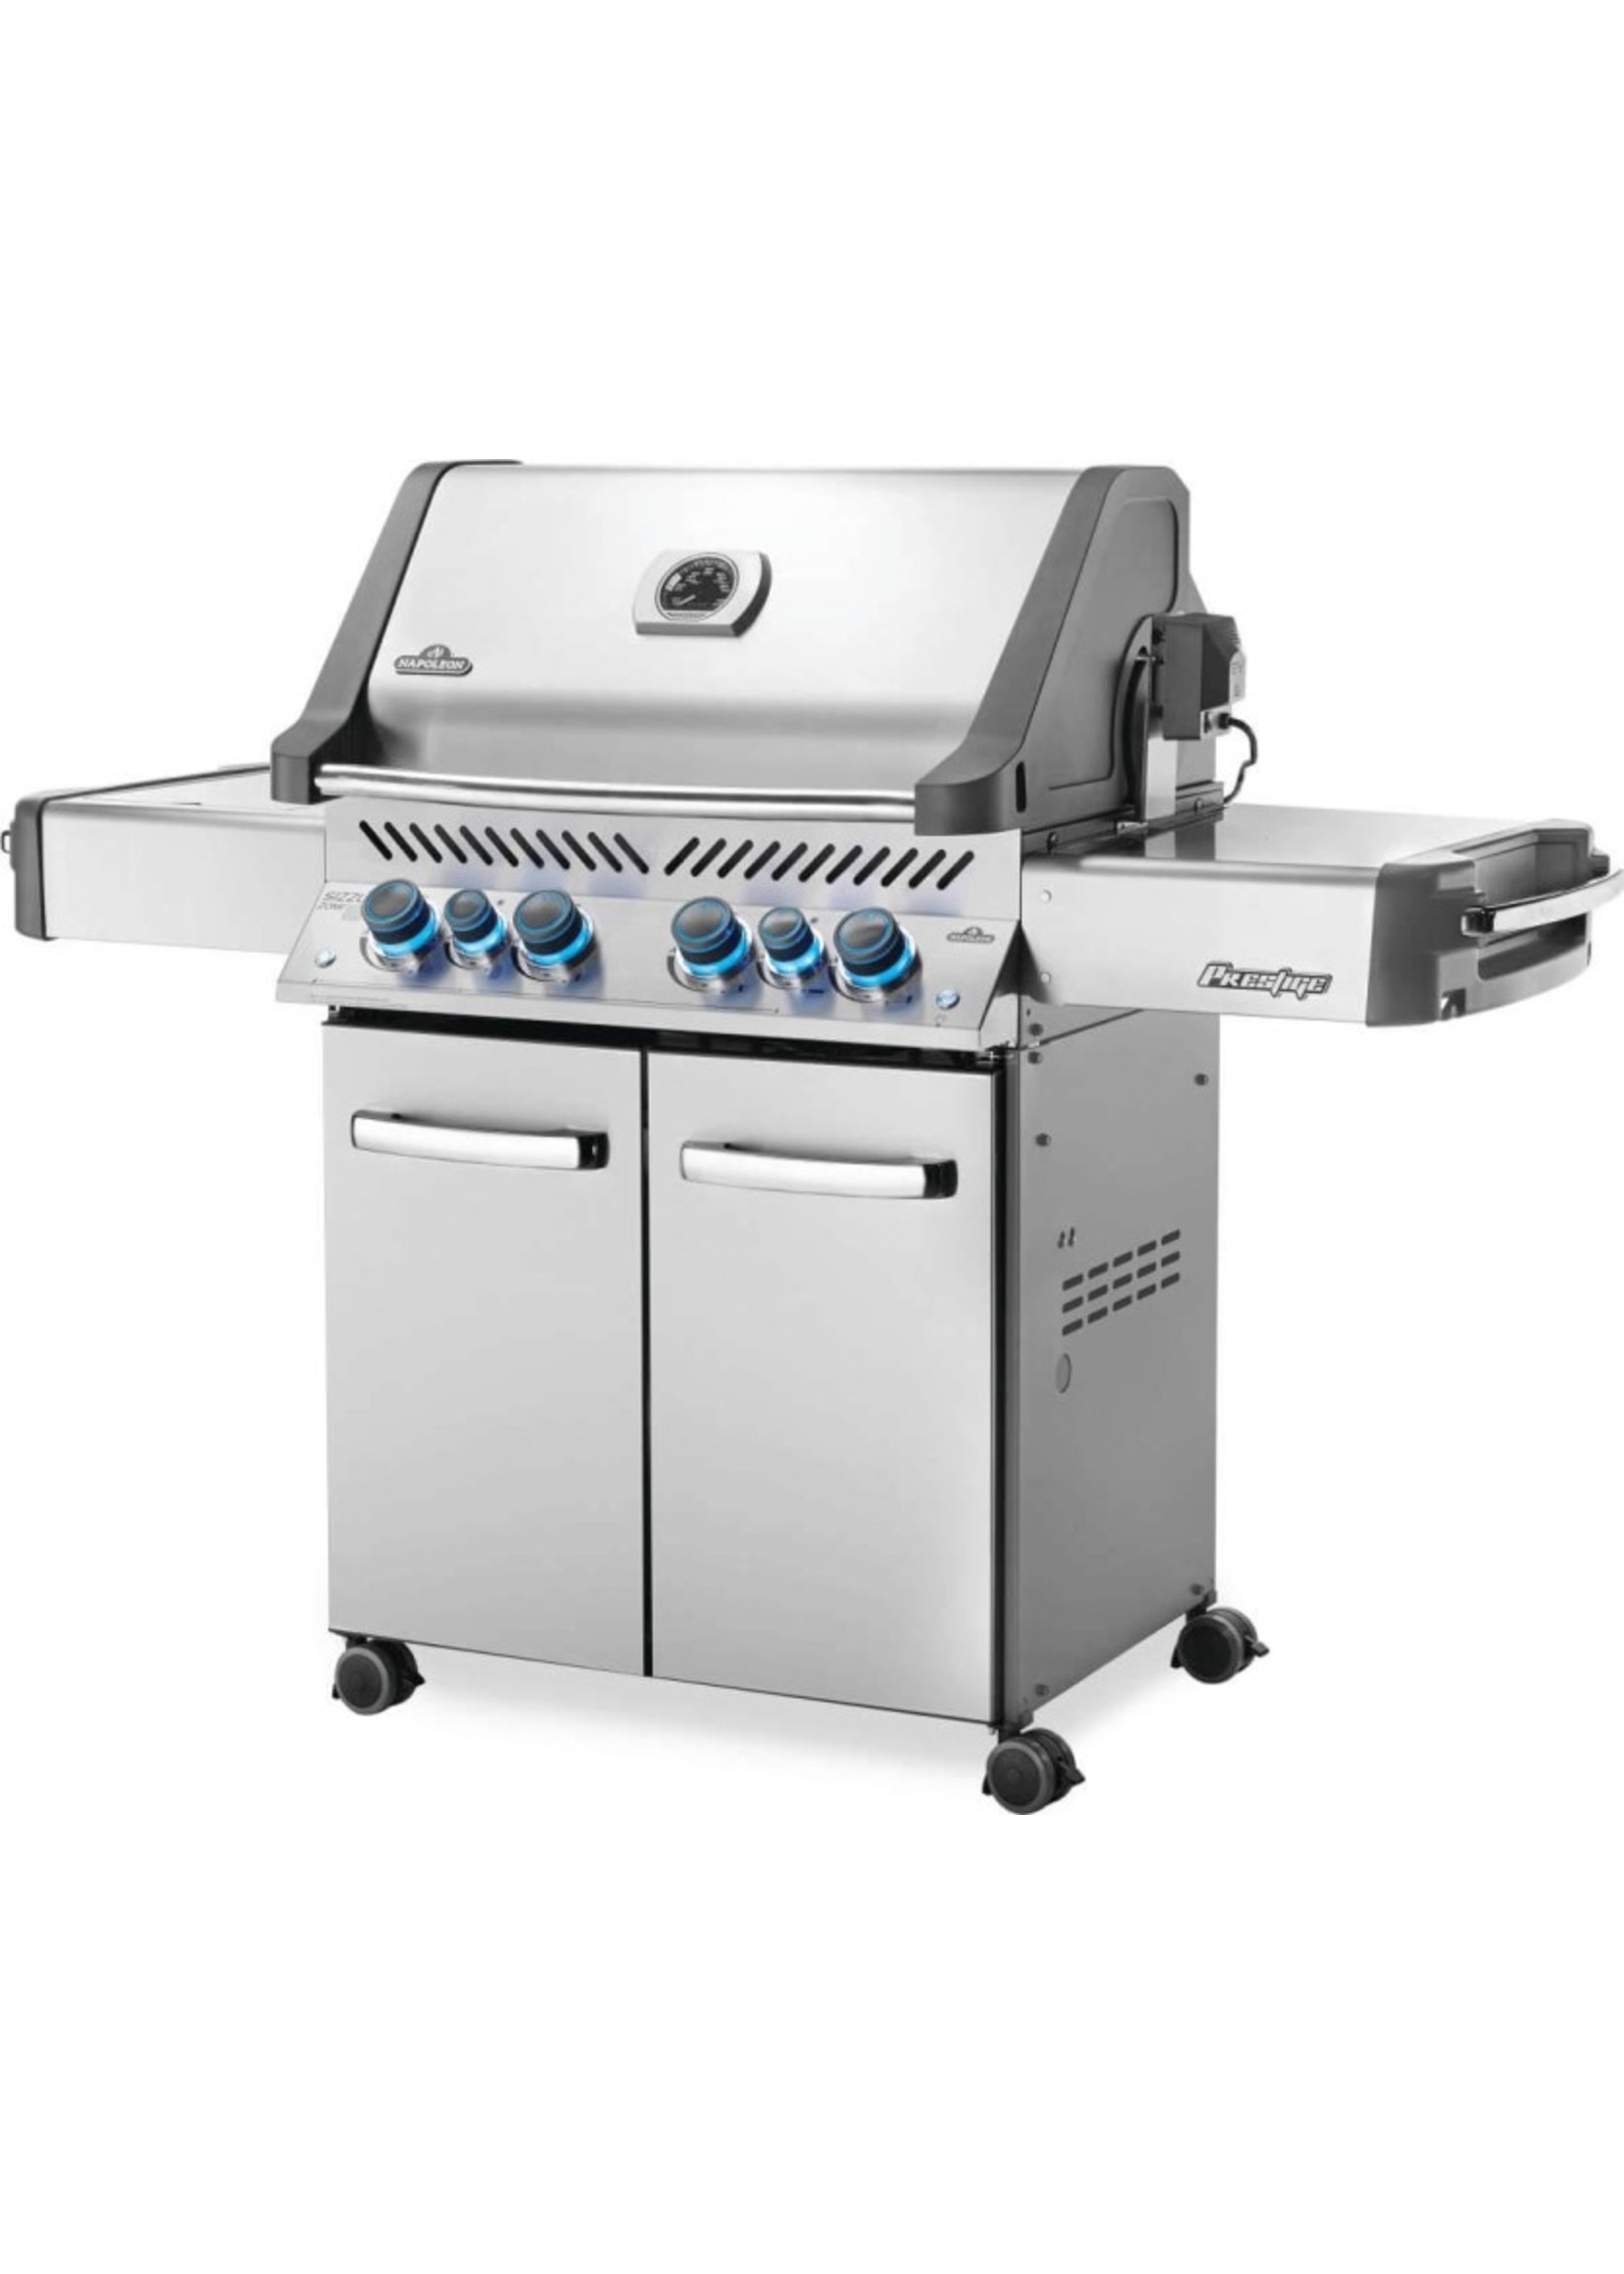 Napoleon PRESTIGE® 500 PROPANE GAS GRILL WITH INFRARED SIDE AND REAR BURNERS